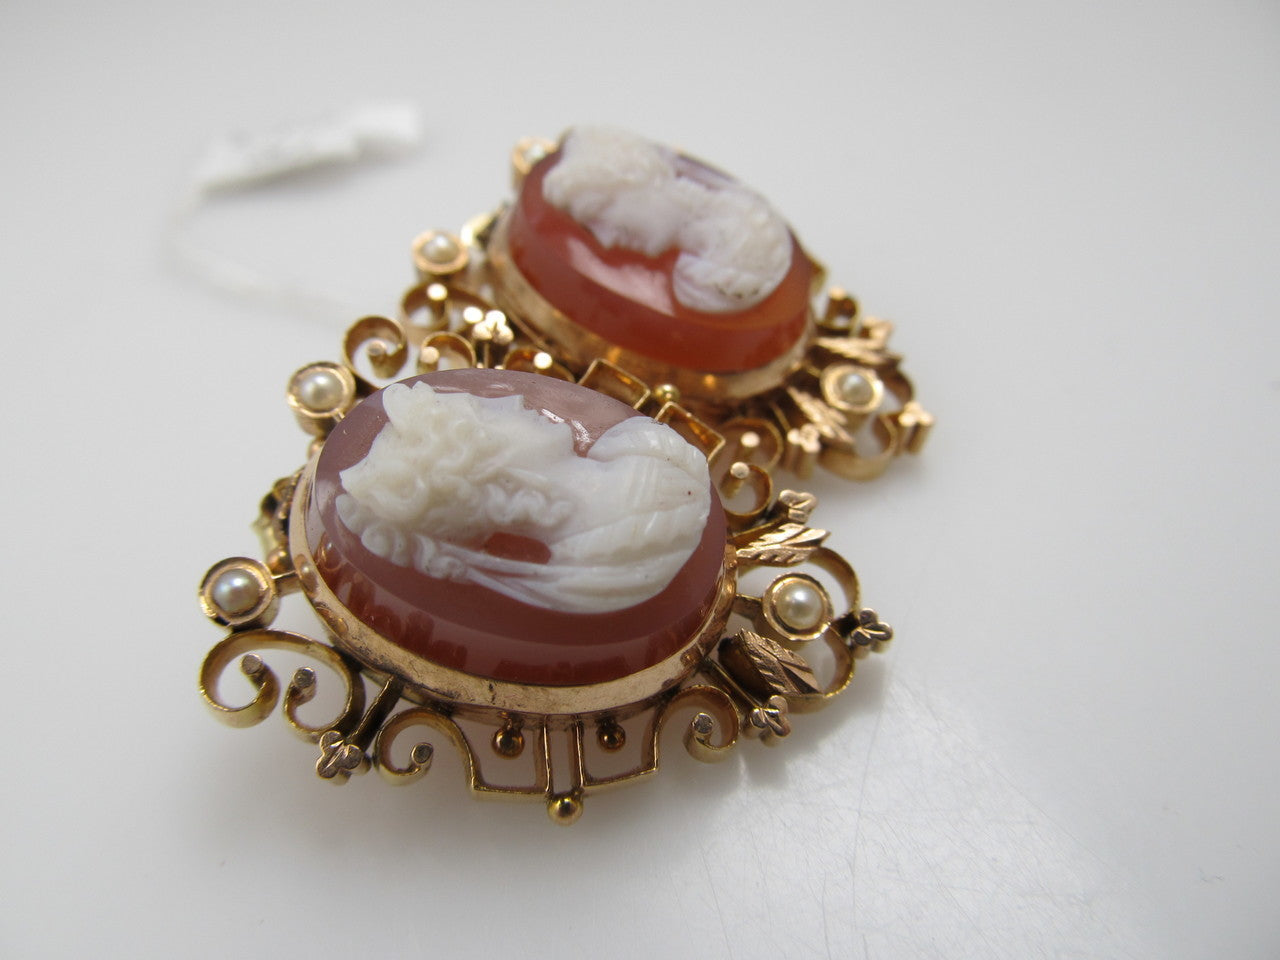 Antique 10k Rose Gold Earrings With Stone Cameos And Pearls, Circa 1890